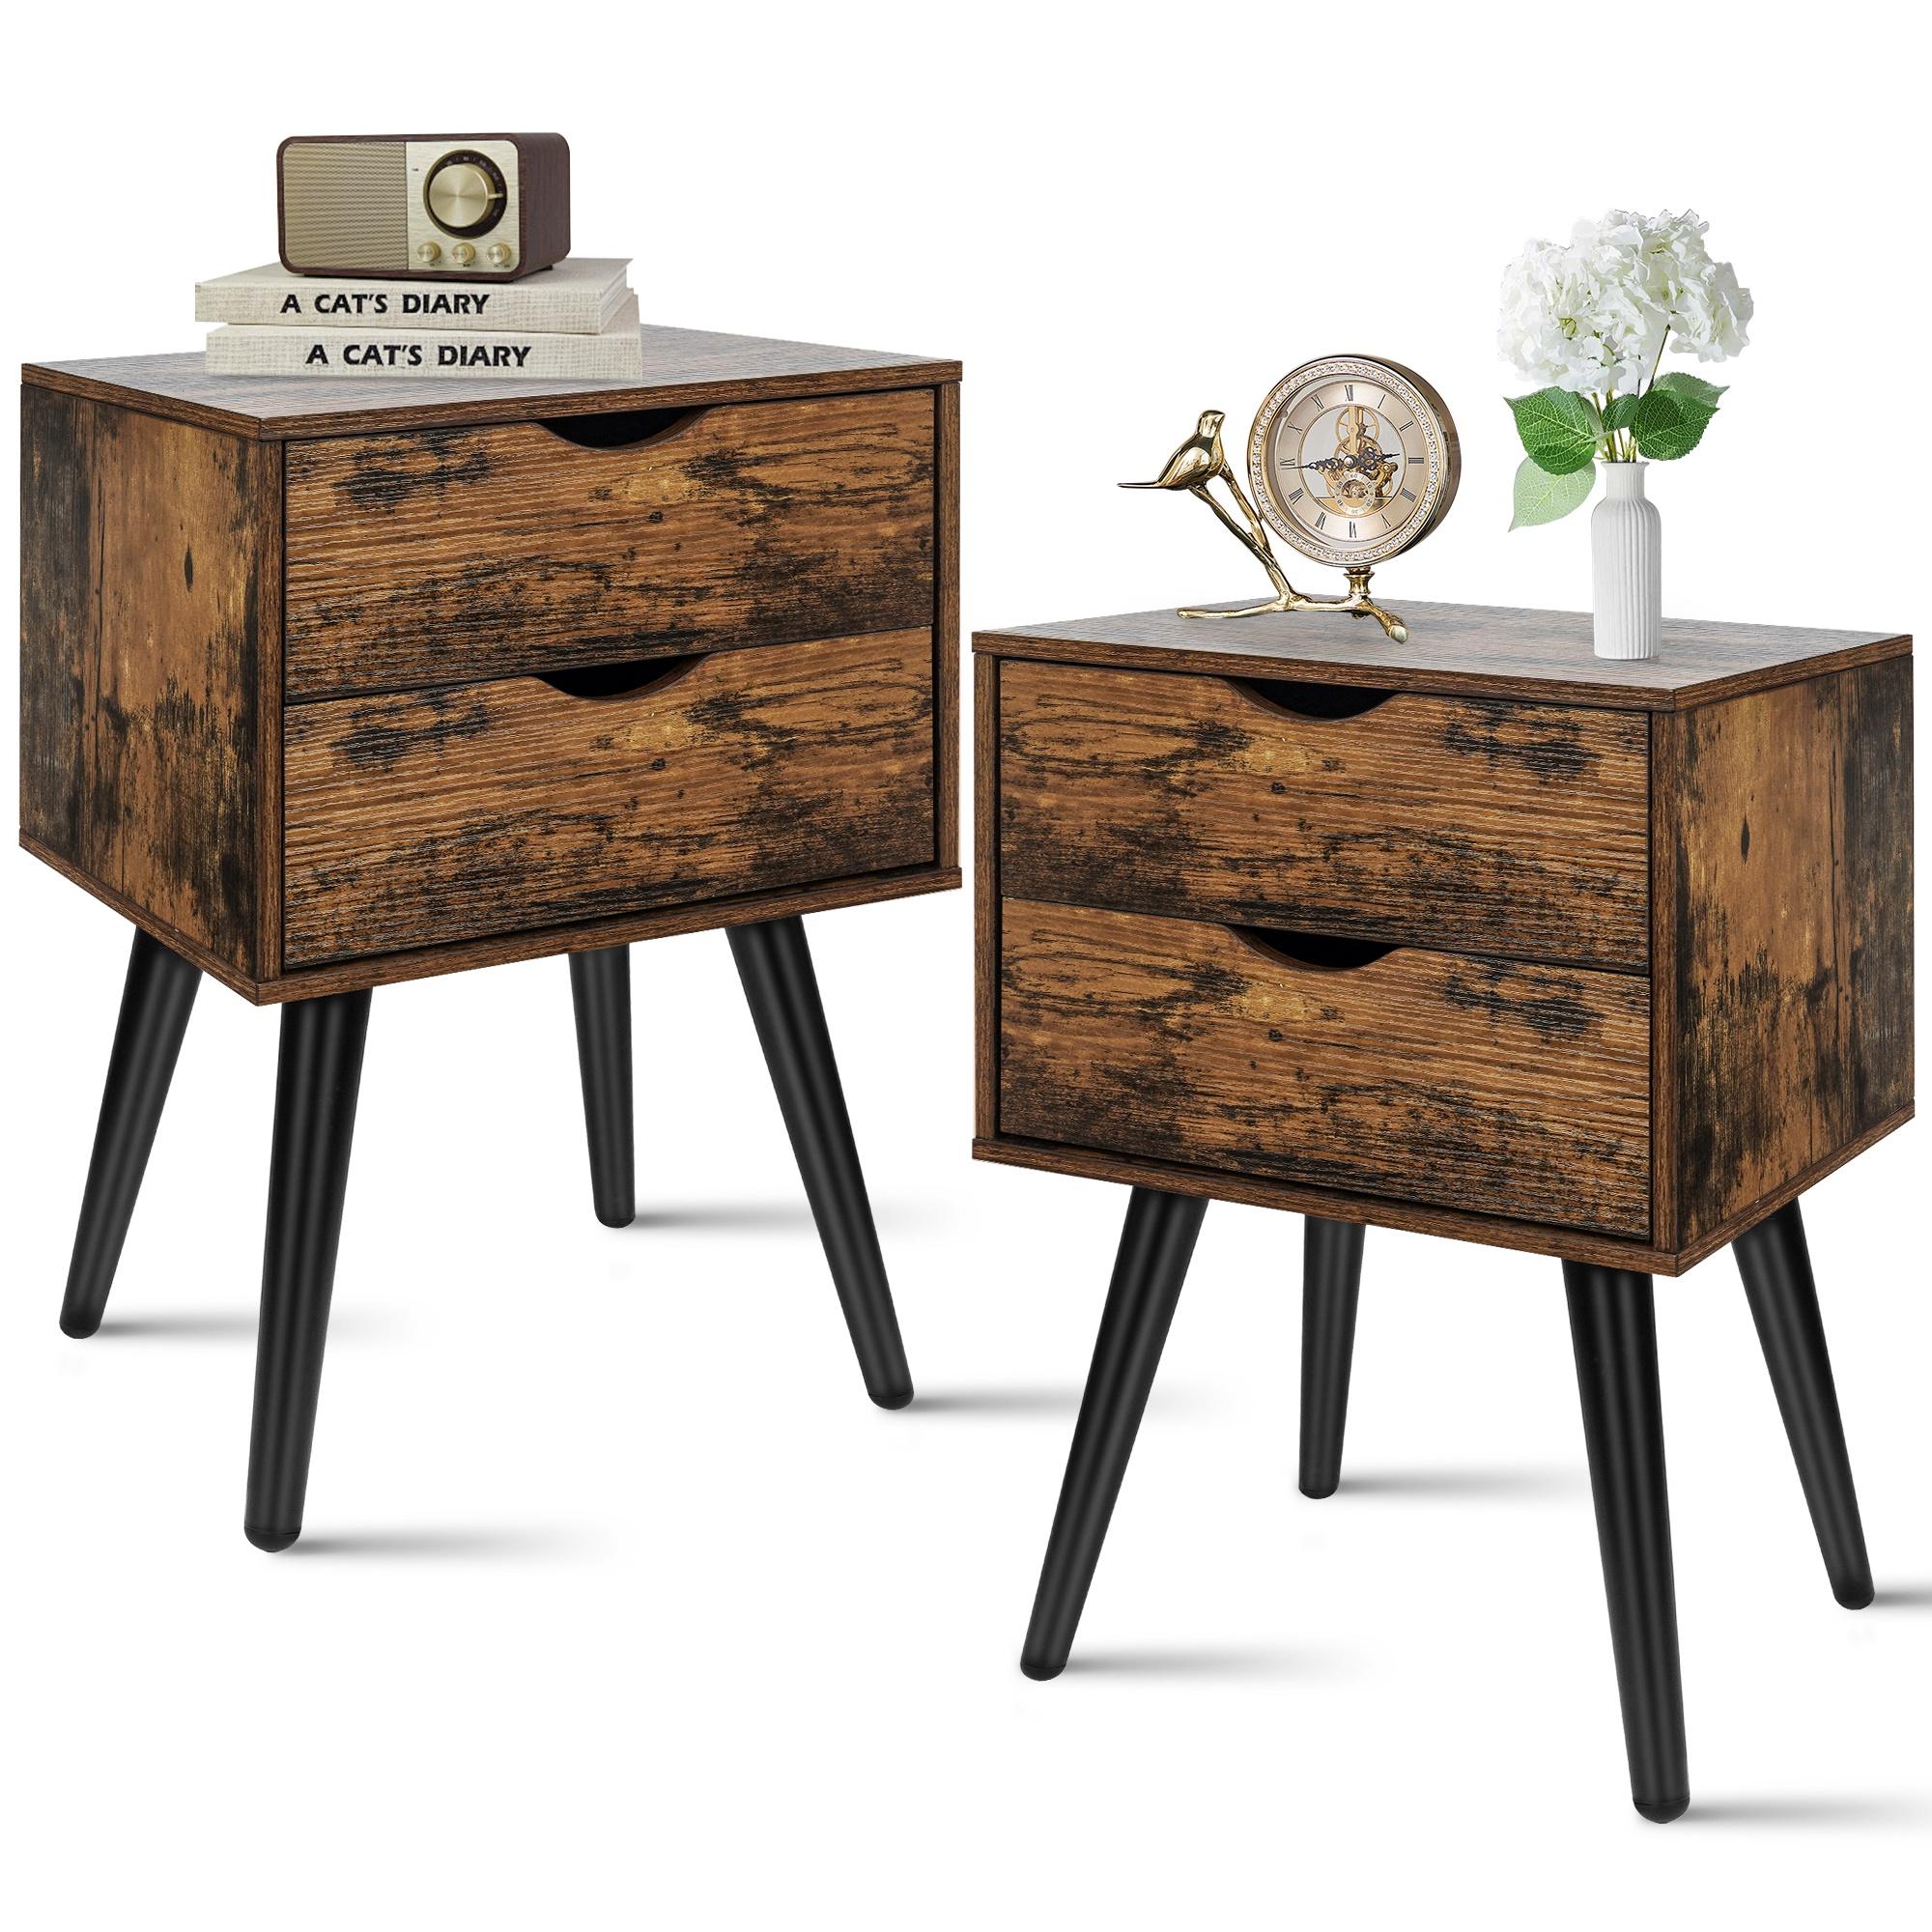 HSUNNS Nightstands Set of 2, Industrial Bedside Tables with 2 Drawers Storage, Wood End Table with Sturdy Metal Legs, Retro Night Stands Organizer, Suitable for Living Room Bedroom, Rustic Brown - image 1 of 12